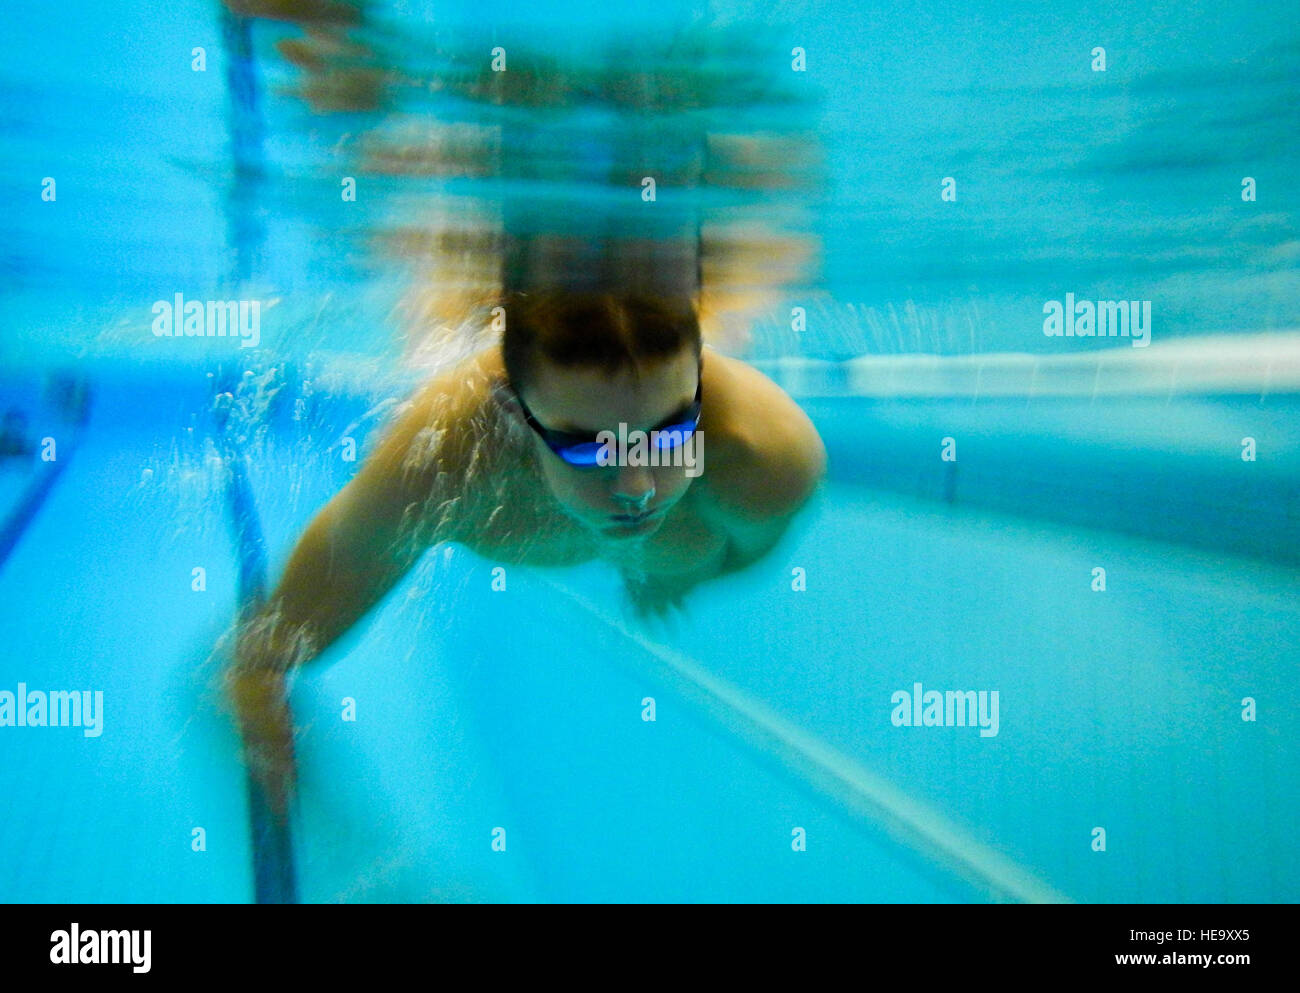 A swimmer from the Lakenheath Barracudas swim team performs swimming techniques during practice at Royal Air Force Honington, England, Sept. 4, 2014. The European Forces Swim League is comprised of American and British swimmers who attend weekly practices and compete against other EFSL teams around the European region.  Airman 1st Class Erin O’Shea Stock Photo